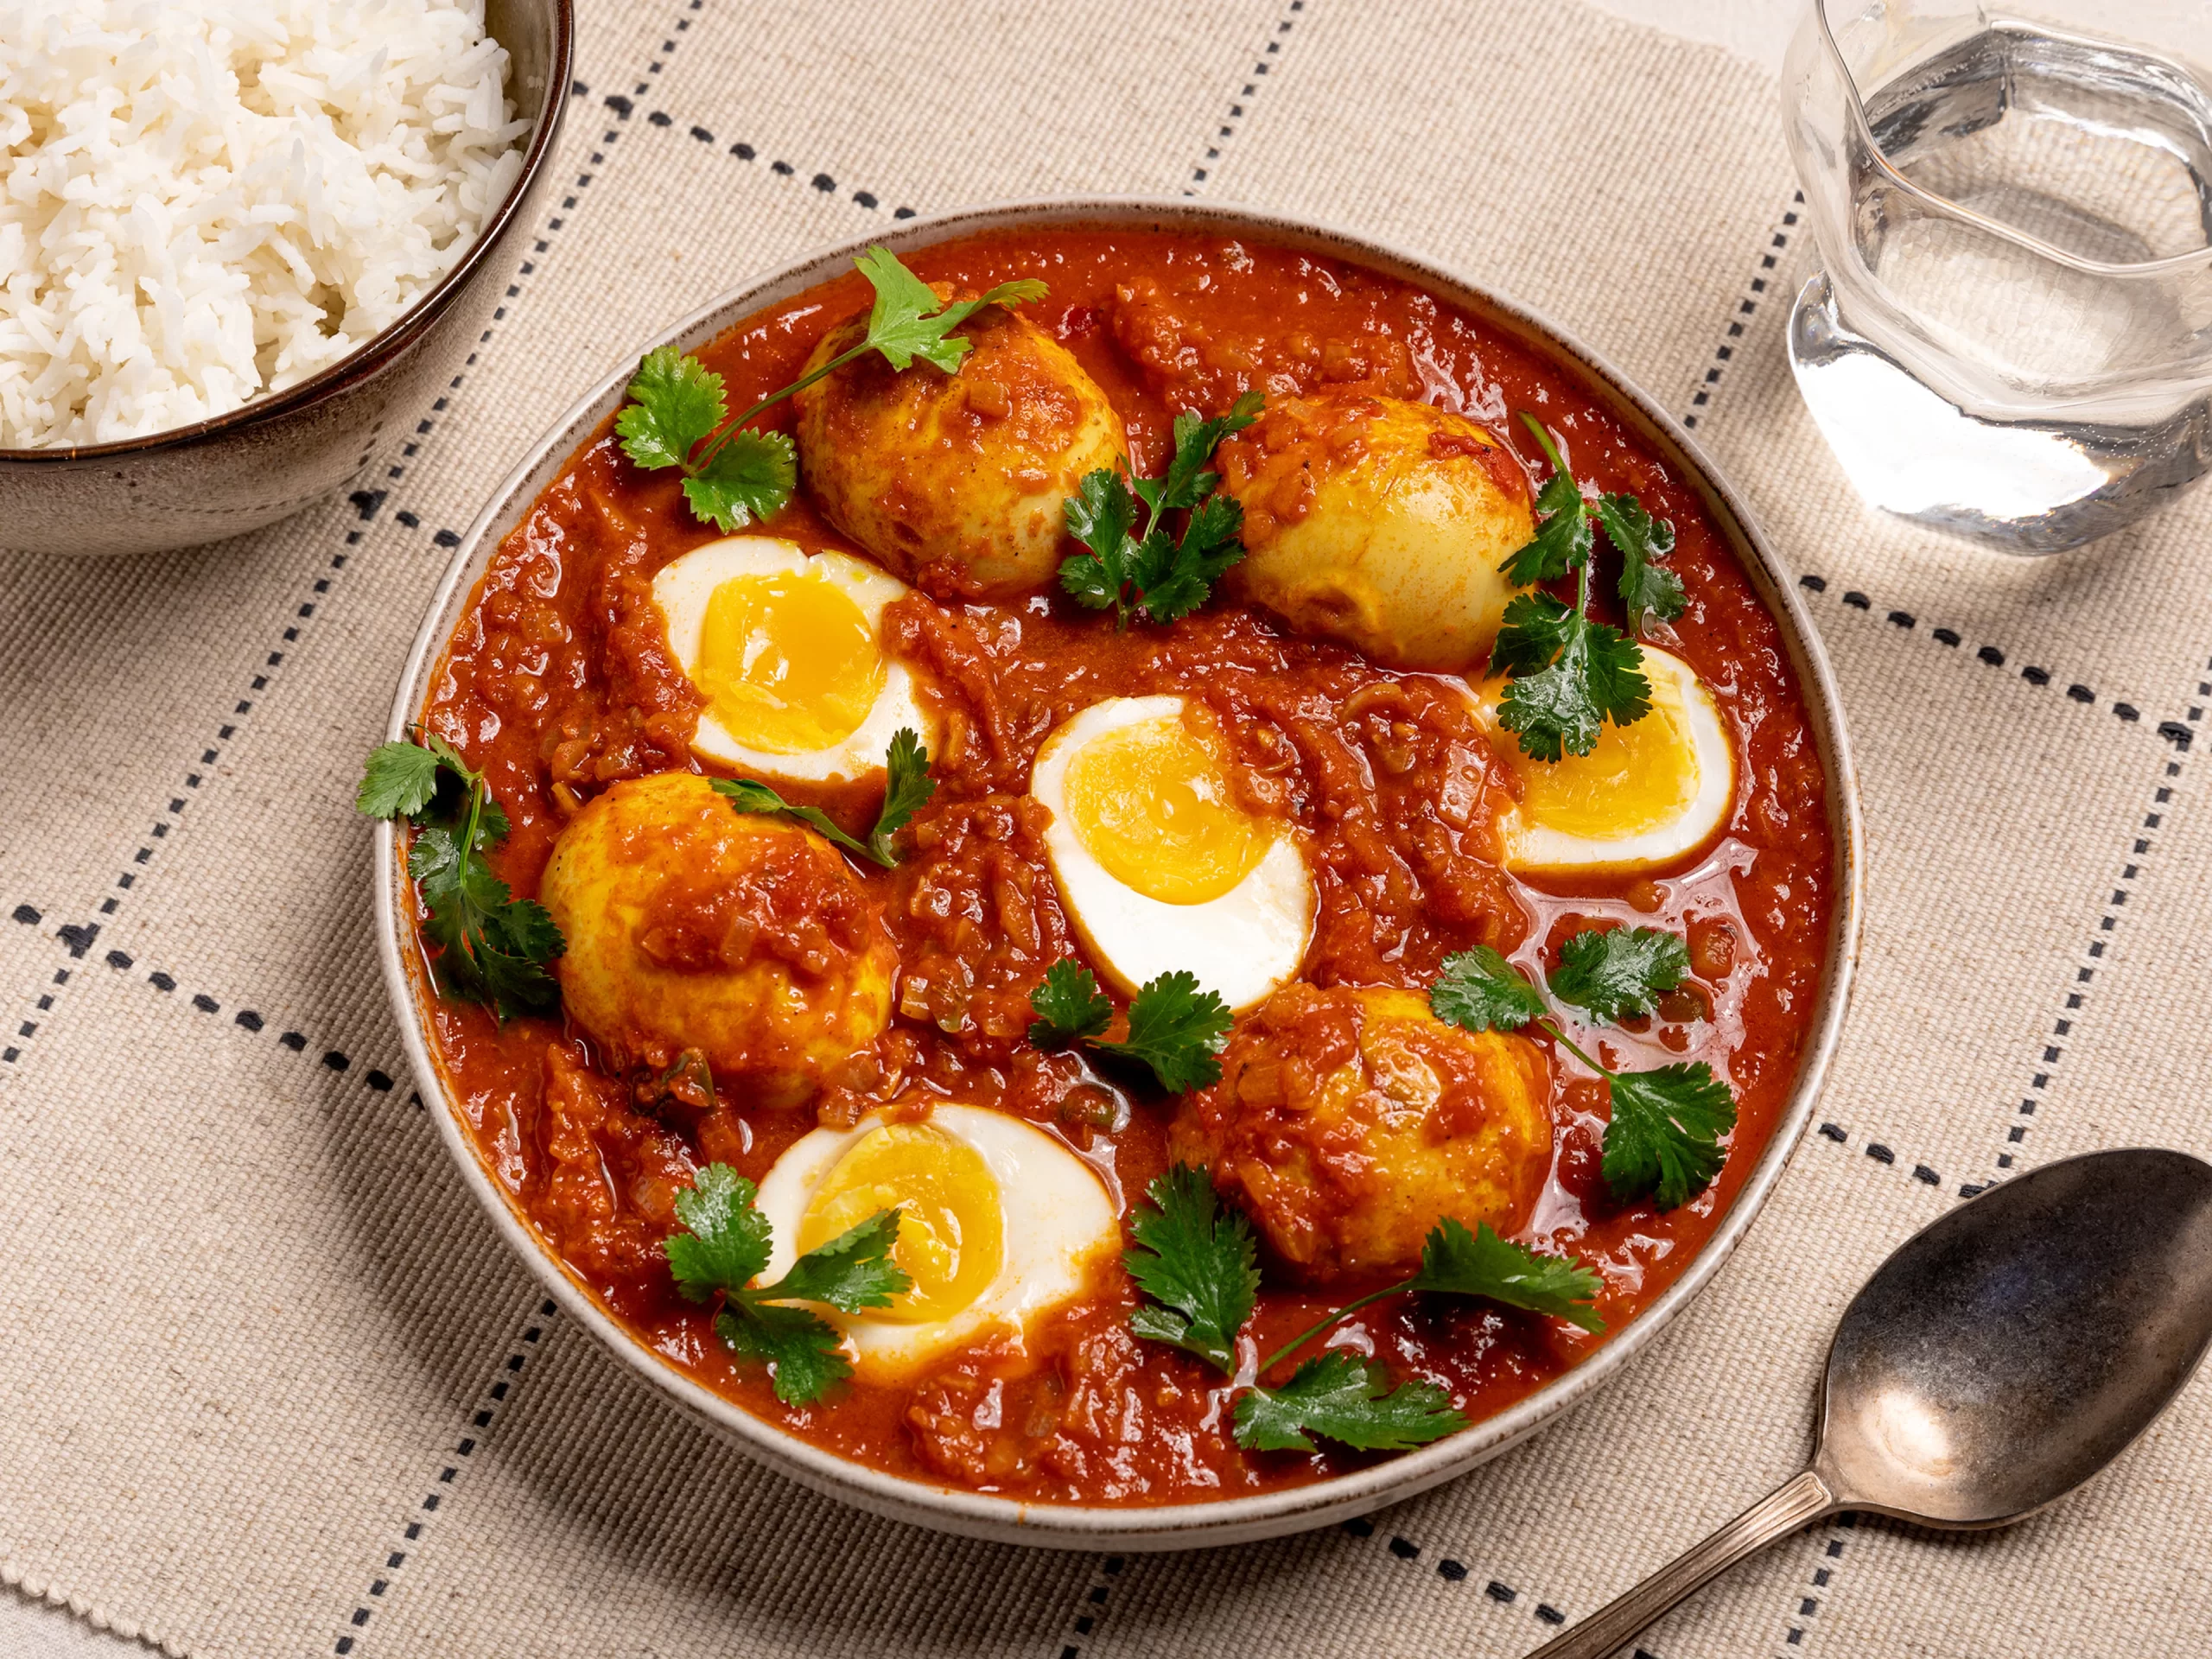 A close-up of golden-hued egg curry garnished with fresh cilantro leaves, inviting viewers to savor the rich flavors and enticing aroma.